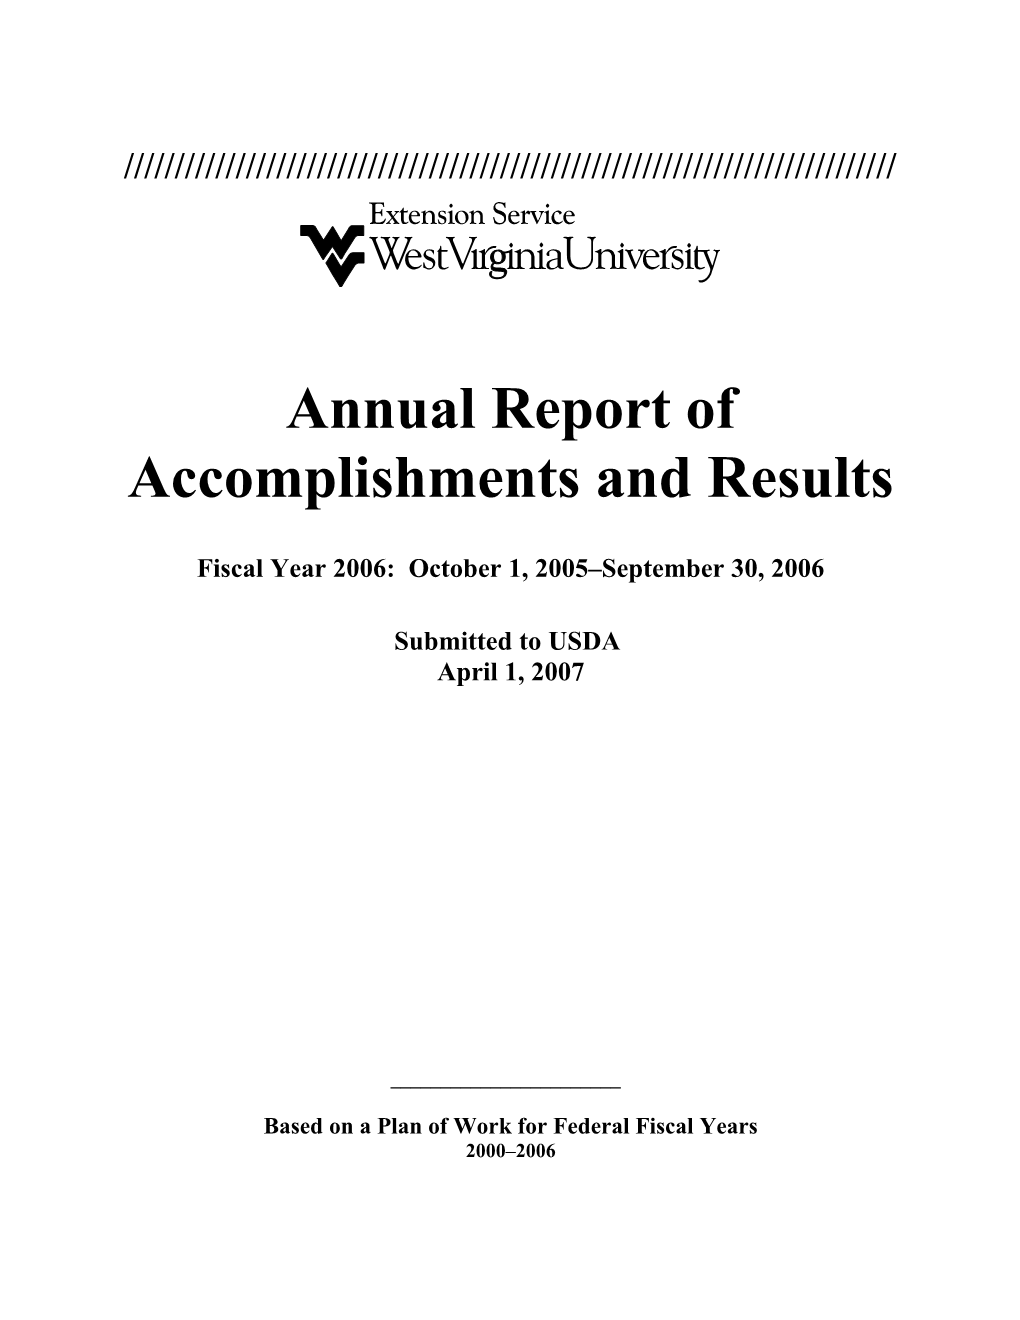 Annual Report of Accomplishments and Results